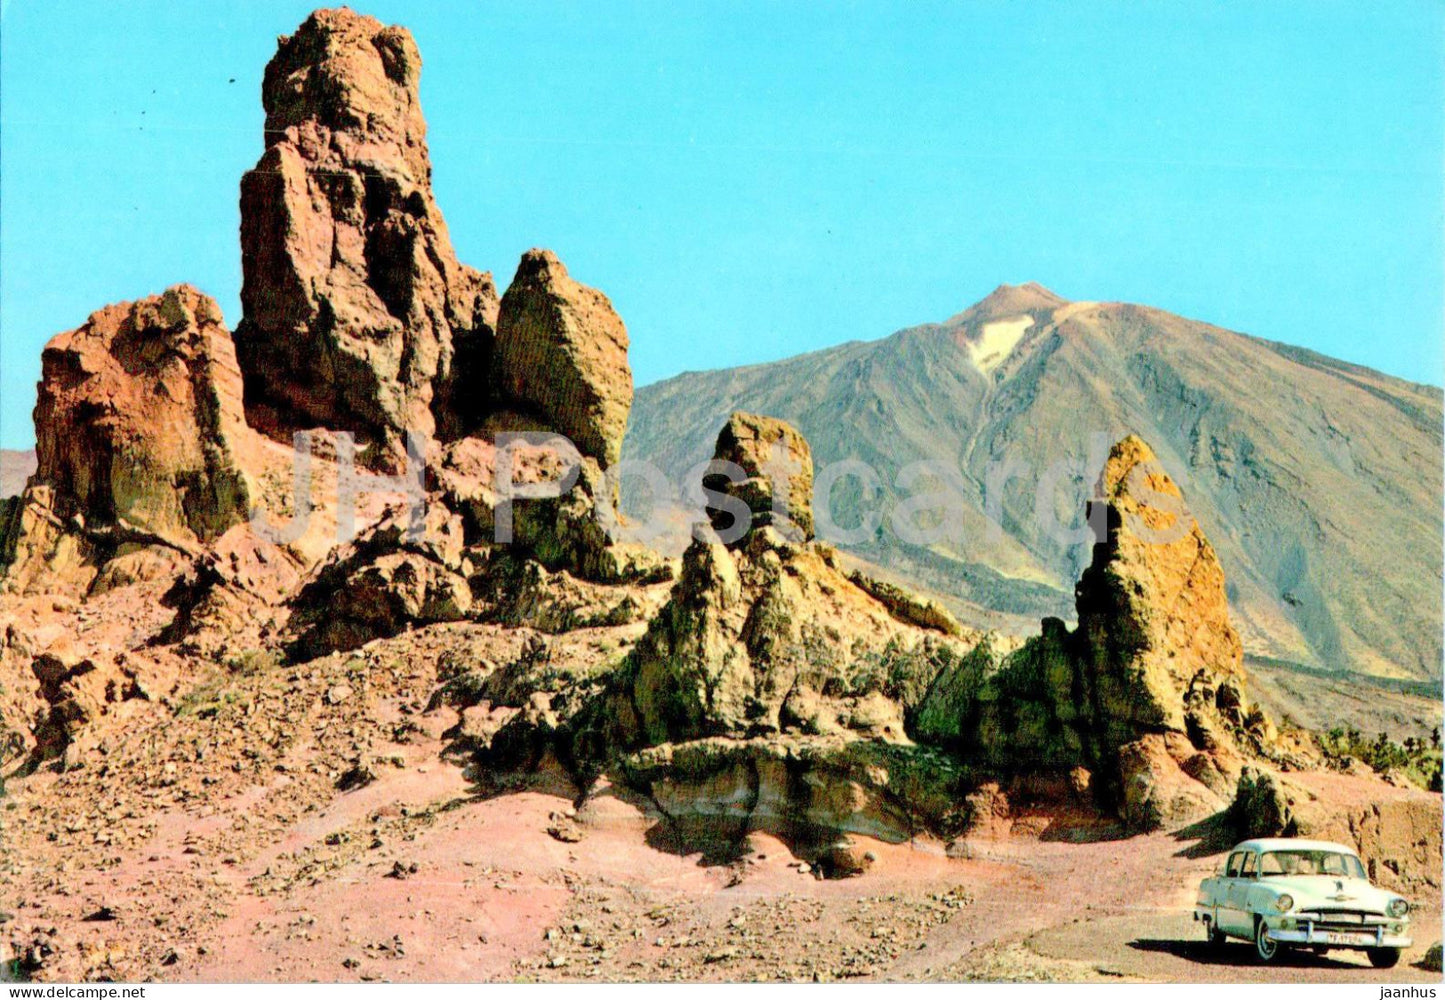 Tenerife - Typical landscape and the Teide - car - 2281 - Spain - unused - JH Postcards